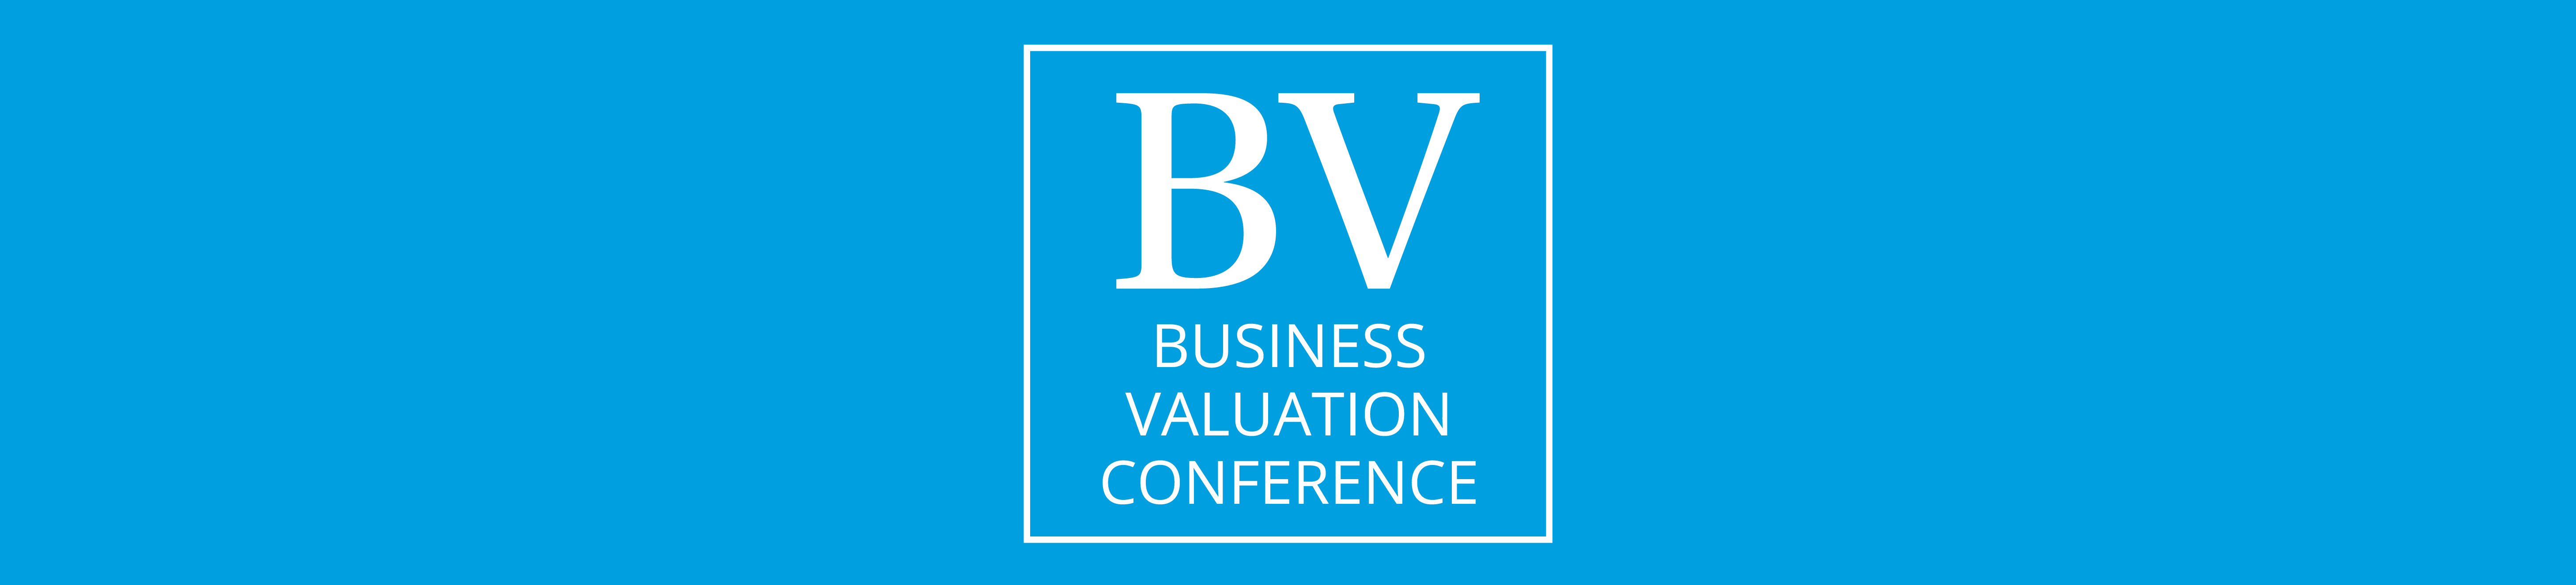 Business Valuation Conference